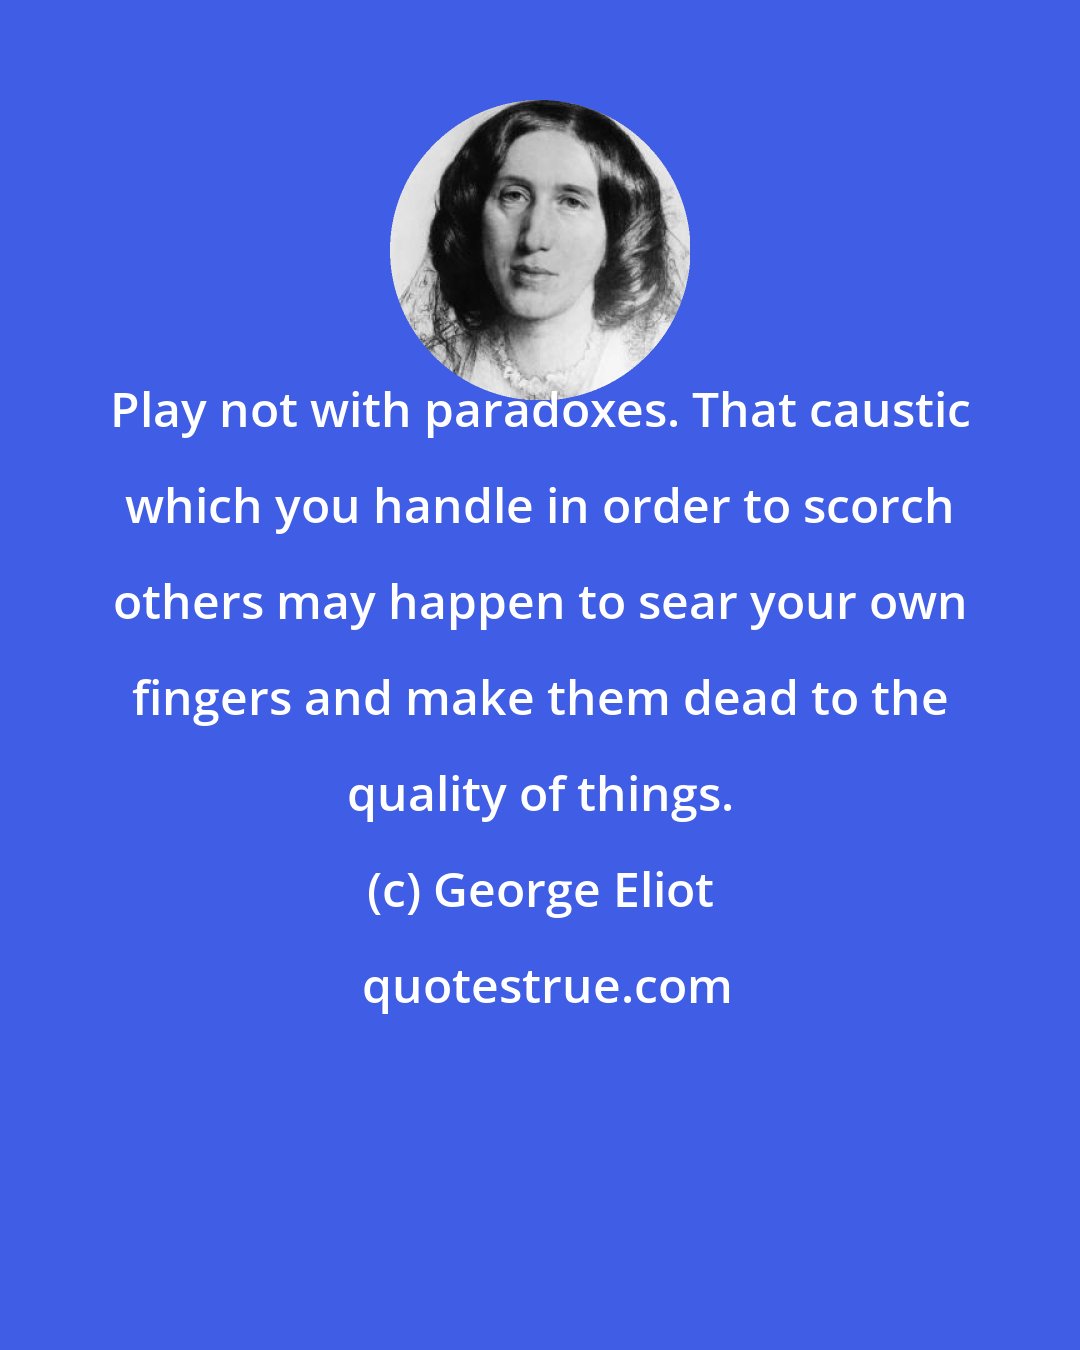 George Eliot: Play not with paradoxes. That caustic which you handle in order to scorch others may happen to sear your own fingers and make them dead to the quality of things.